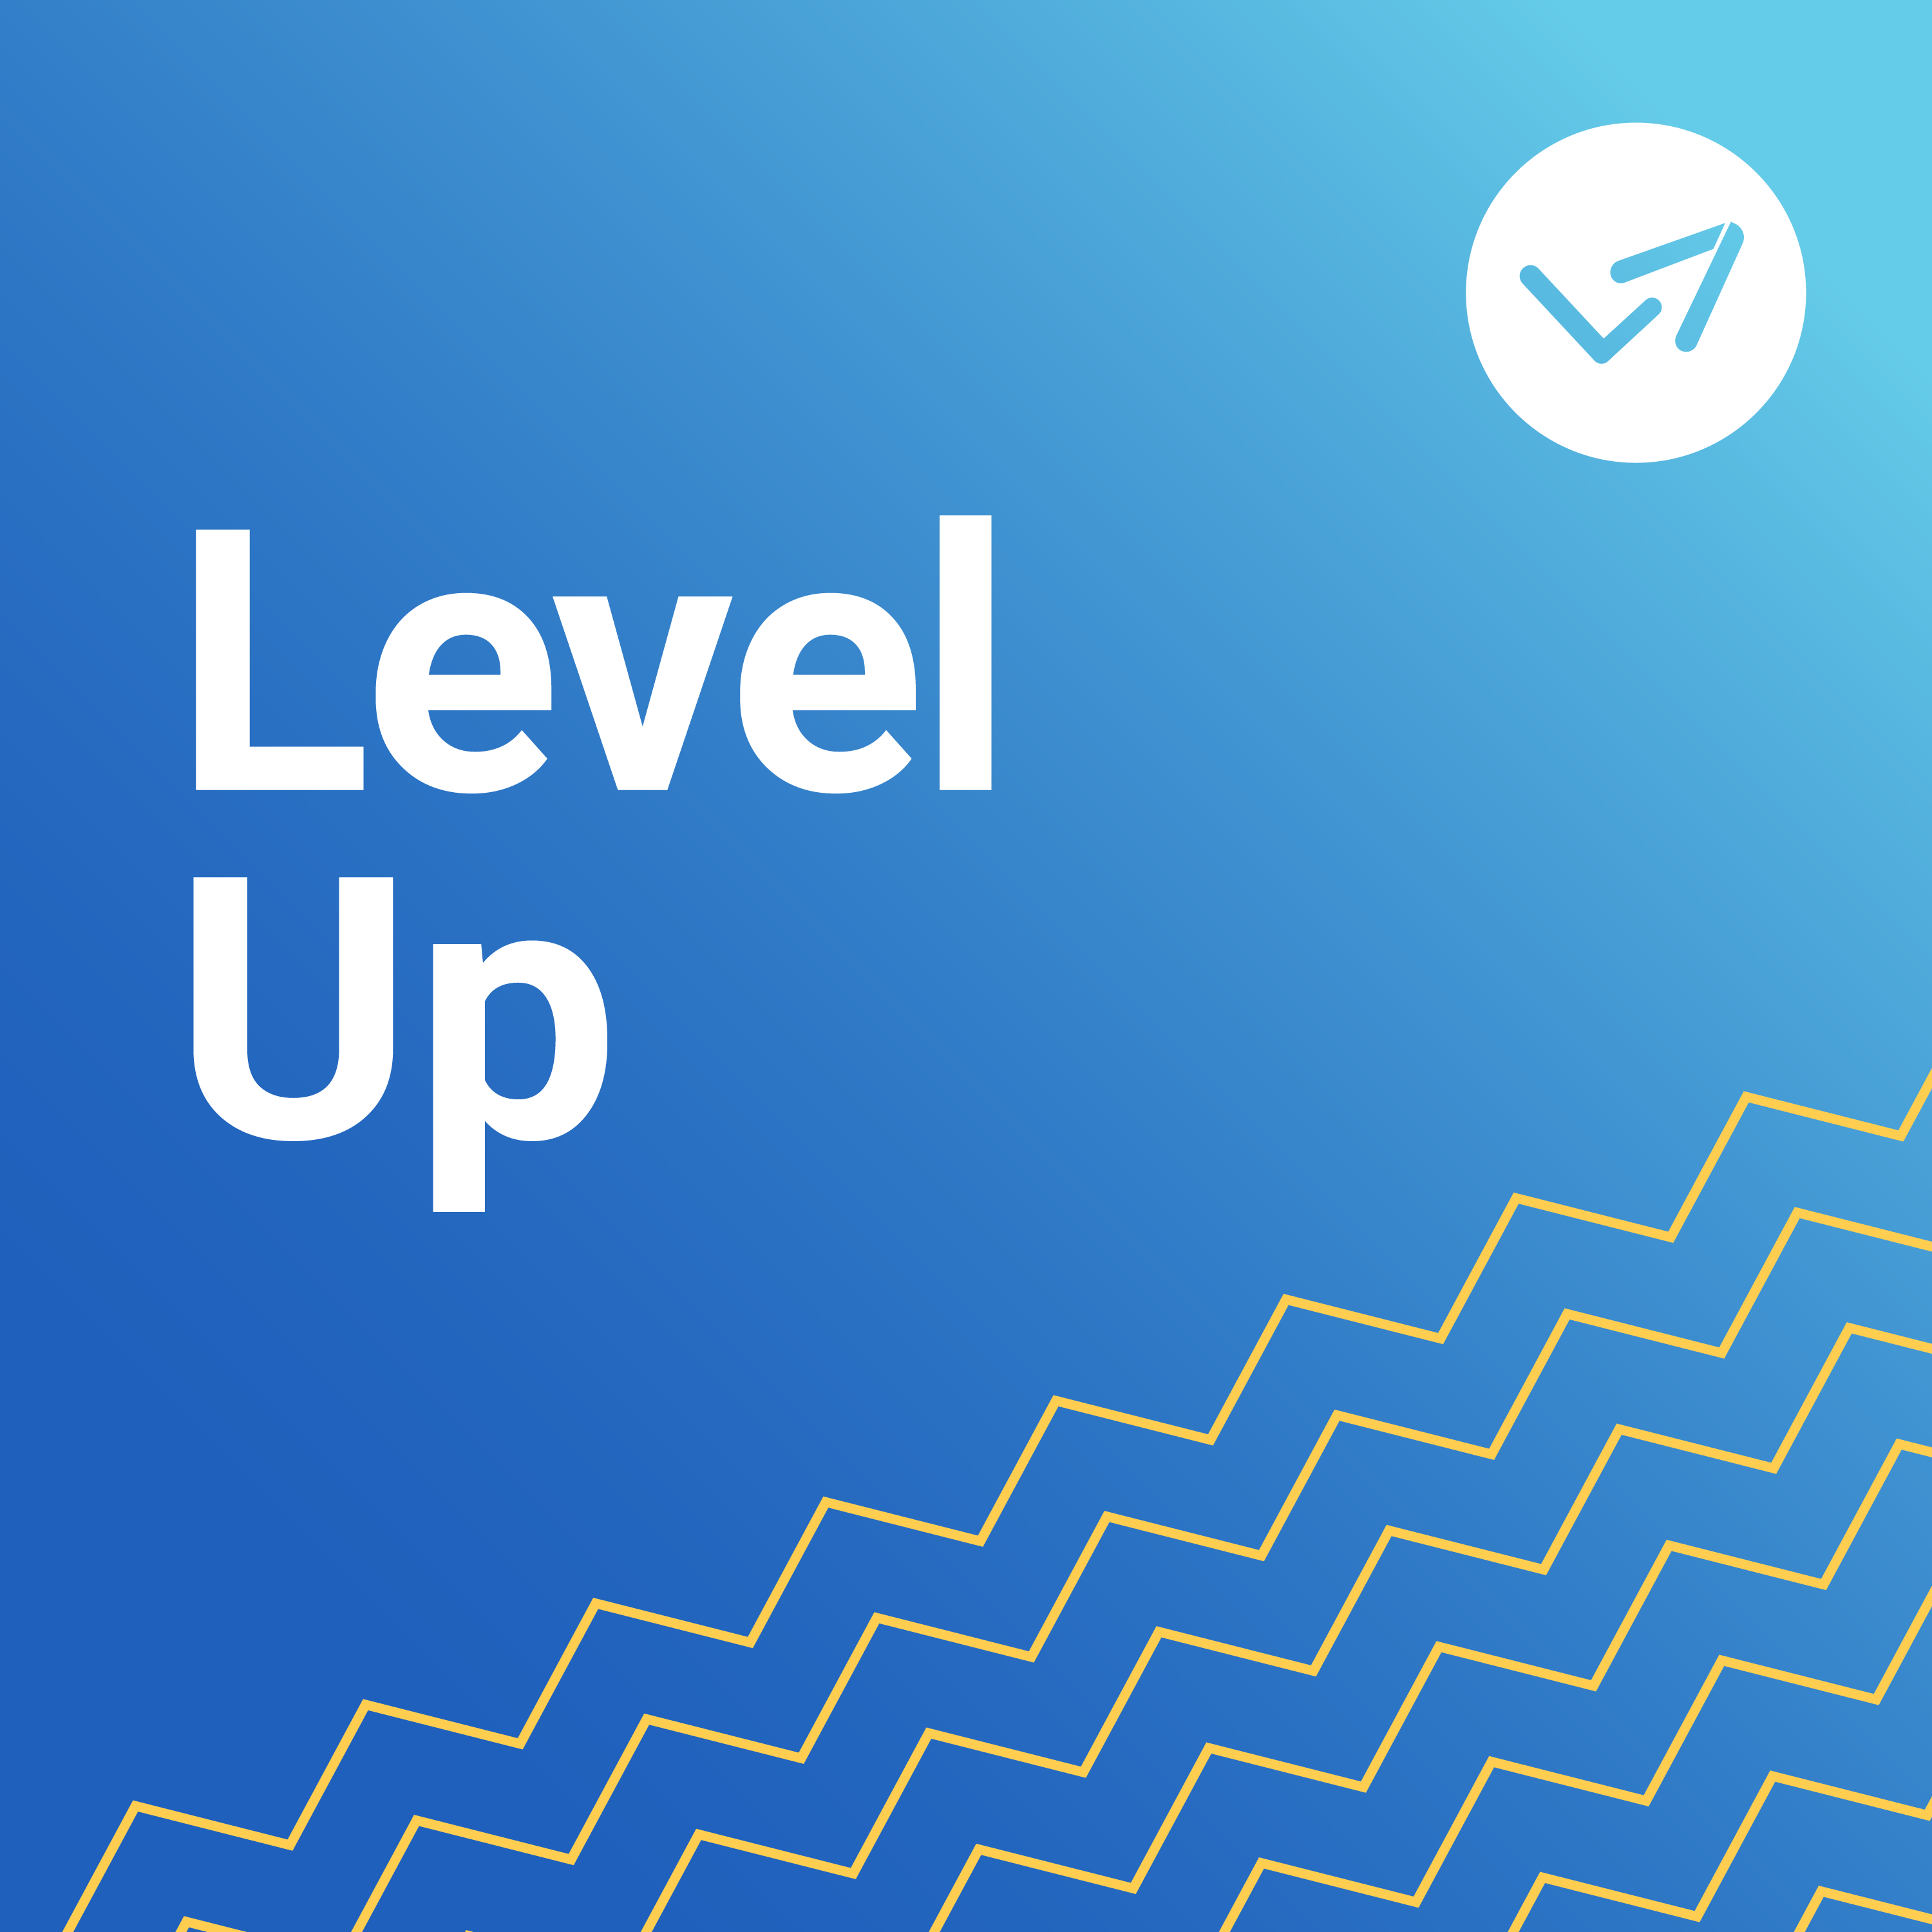 The quest to level up